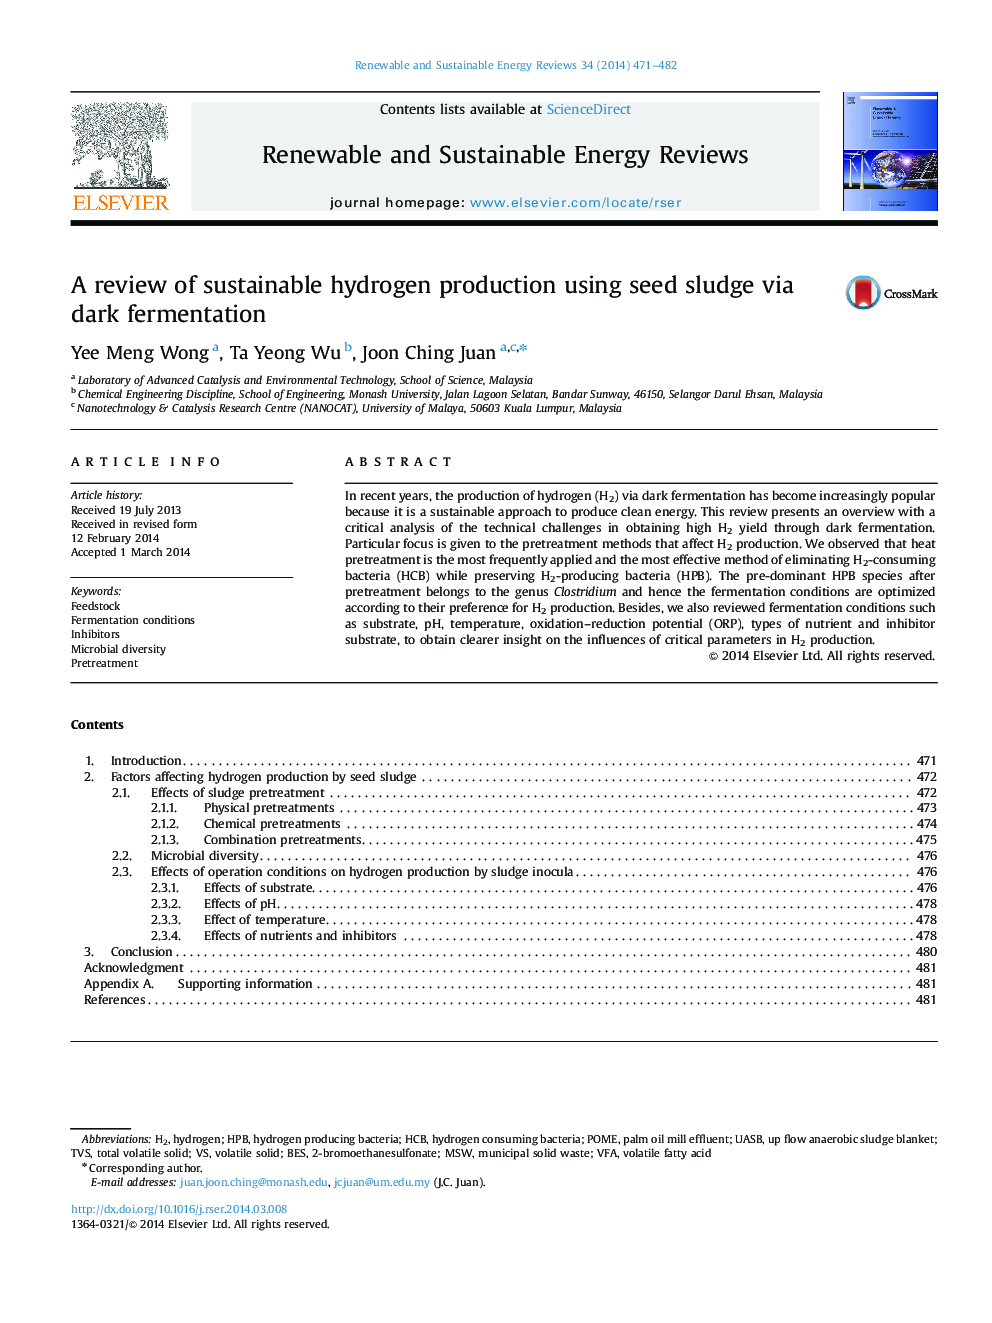 A review of sustainable hydrogen production using seed sludge via dark fermentation